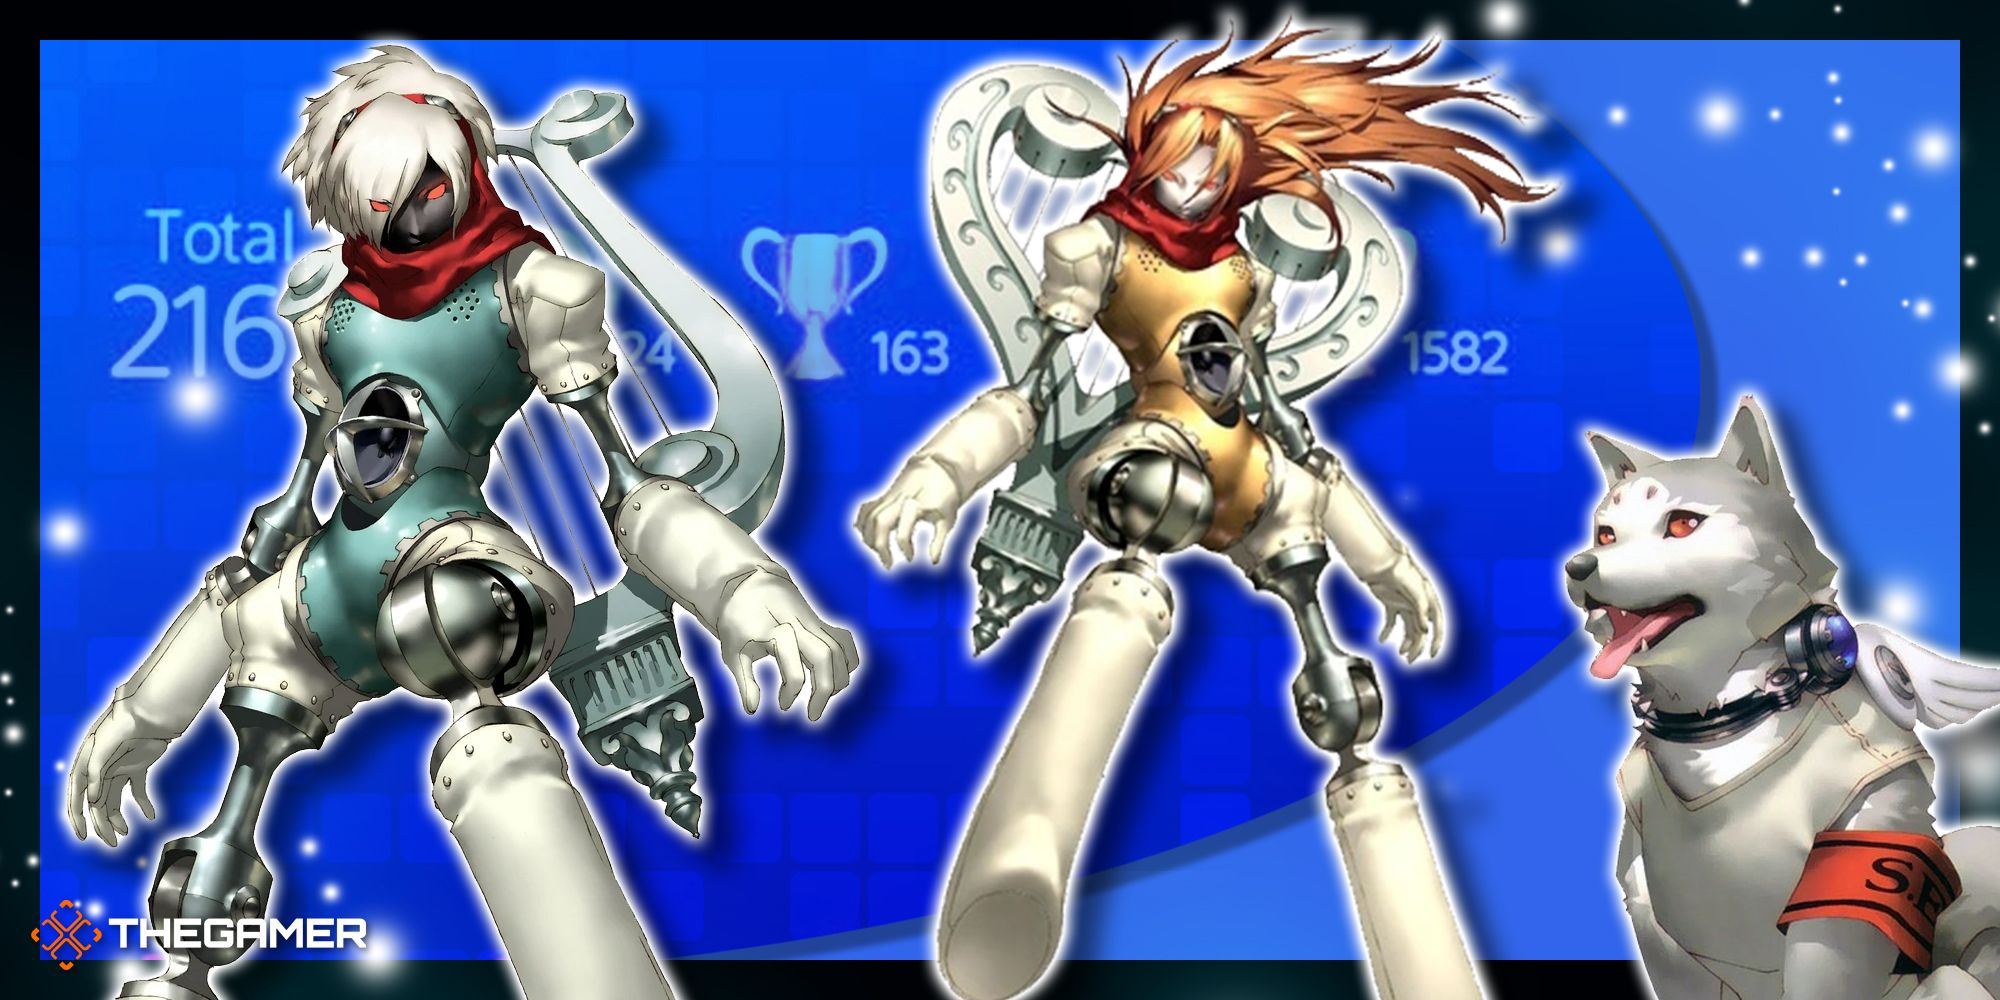 both variants of orpheus representing persona 3 portable's two protagonists